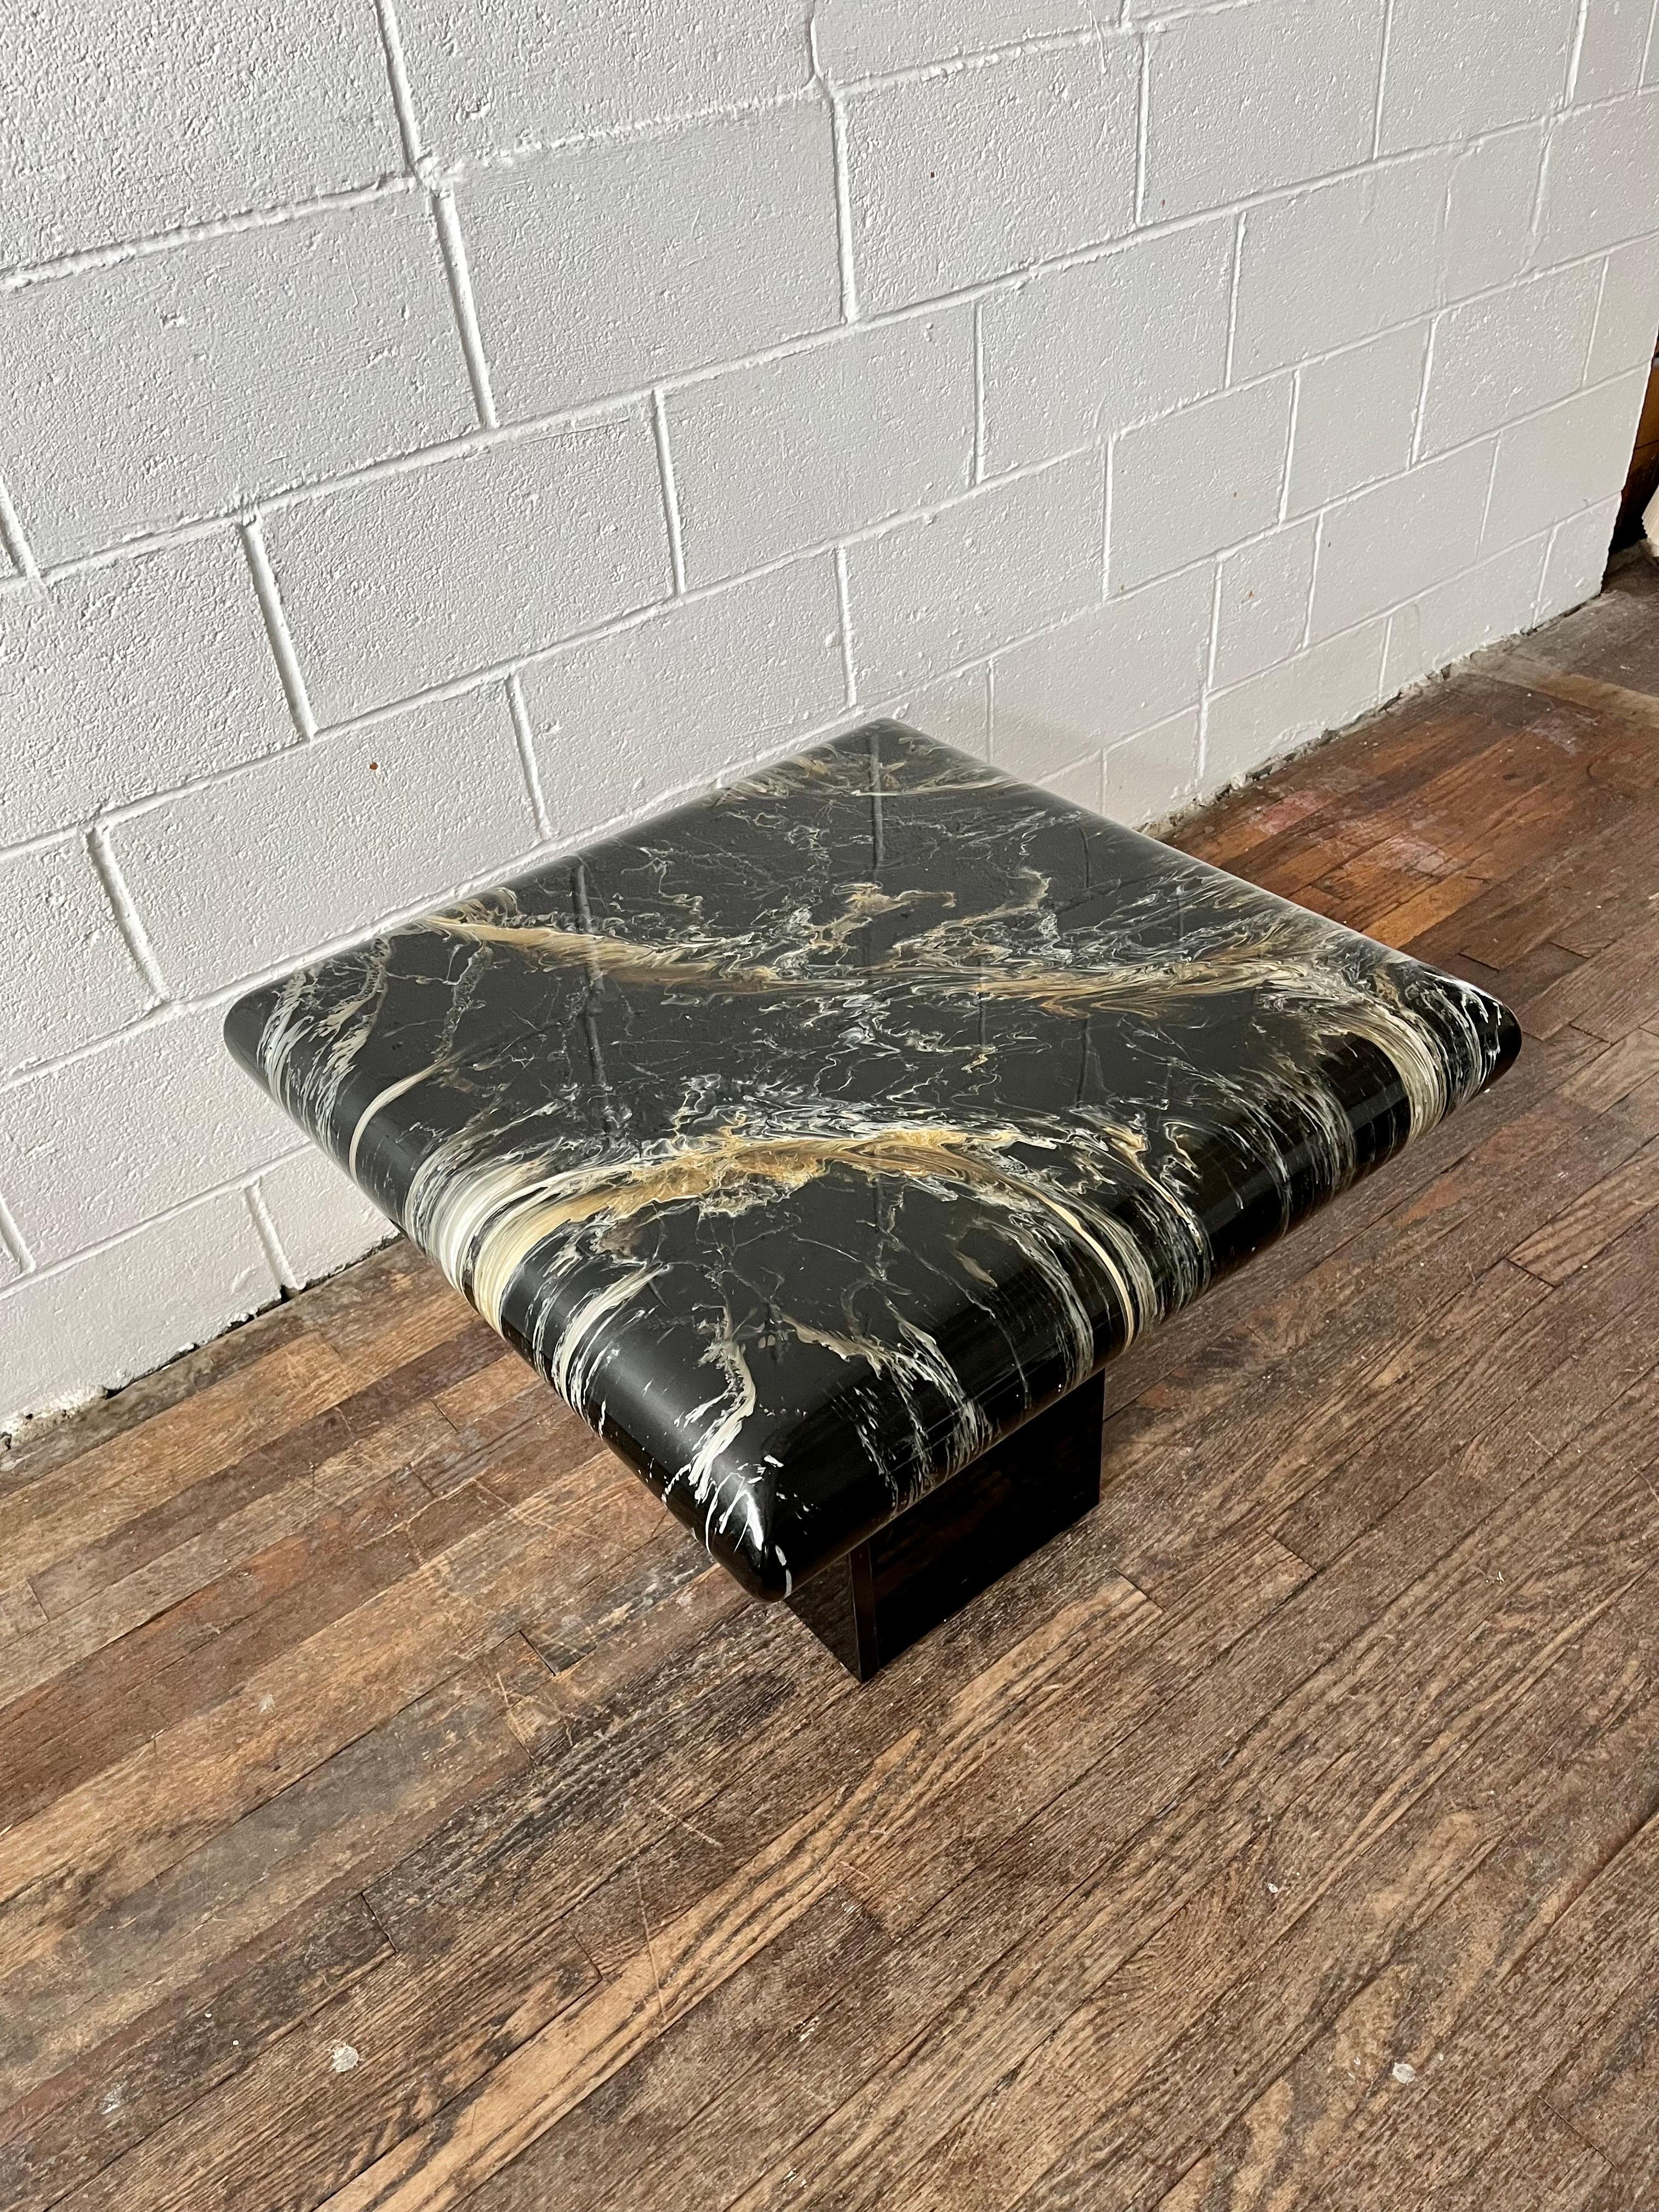 Laminate Mid 20th Century Karl Springer Style End Table in Faux Marble Finish For Sale